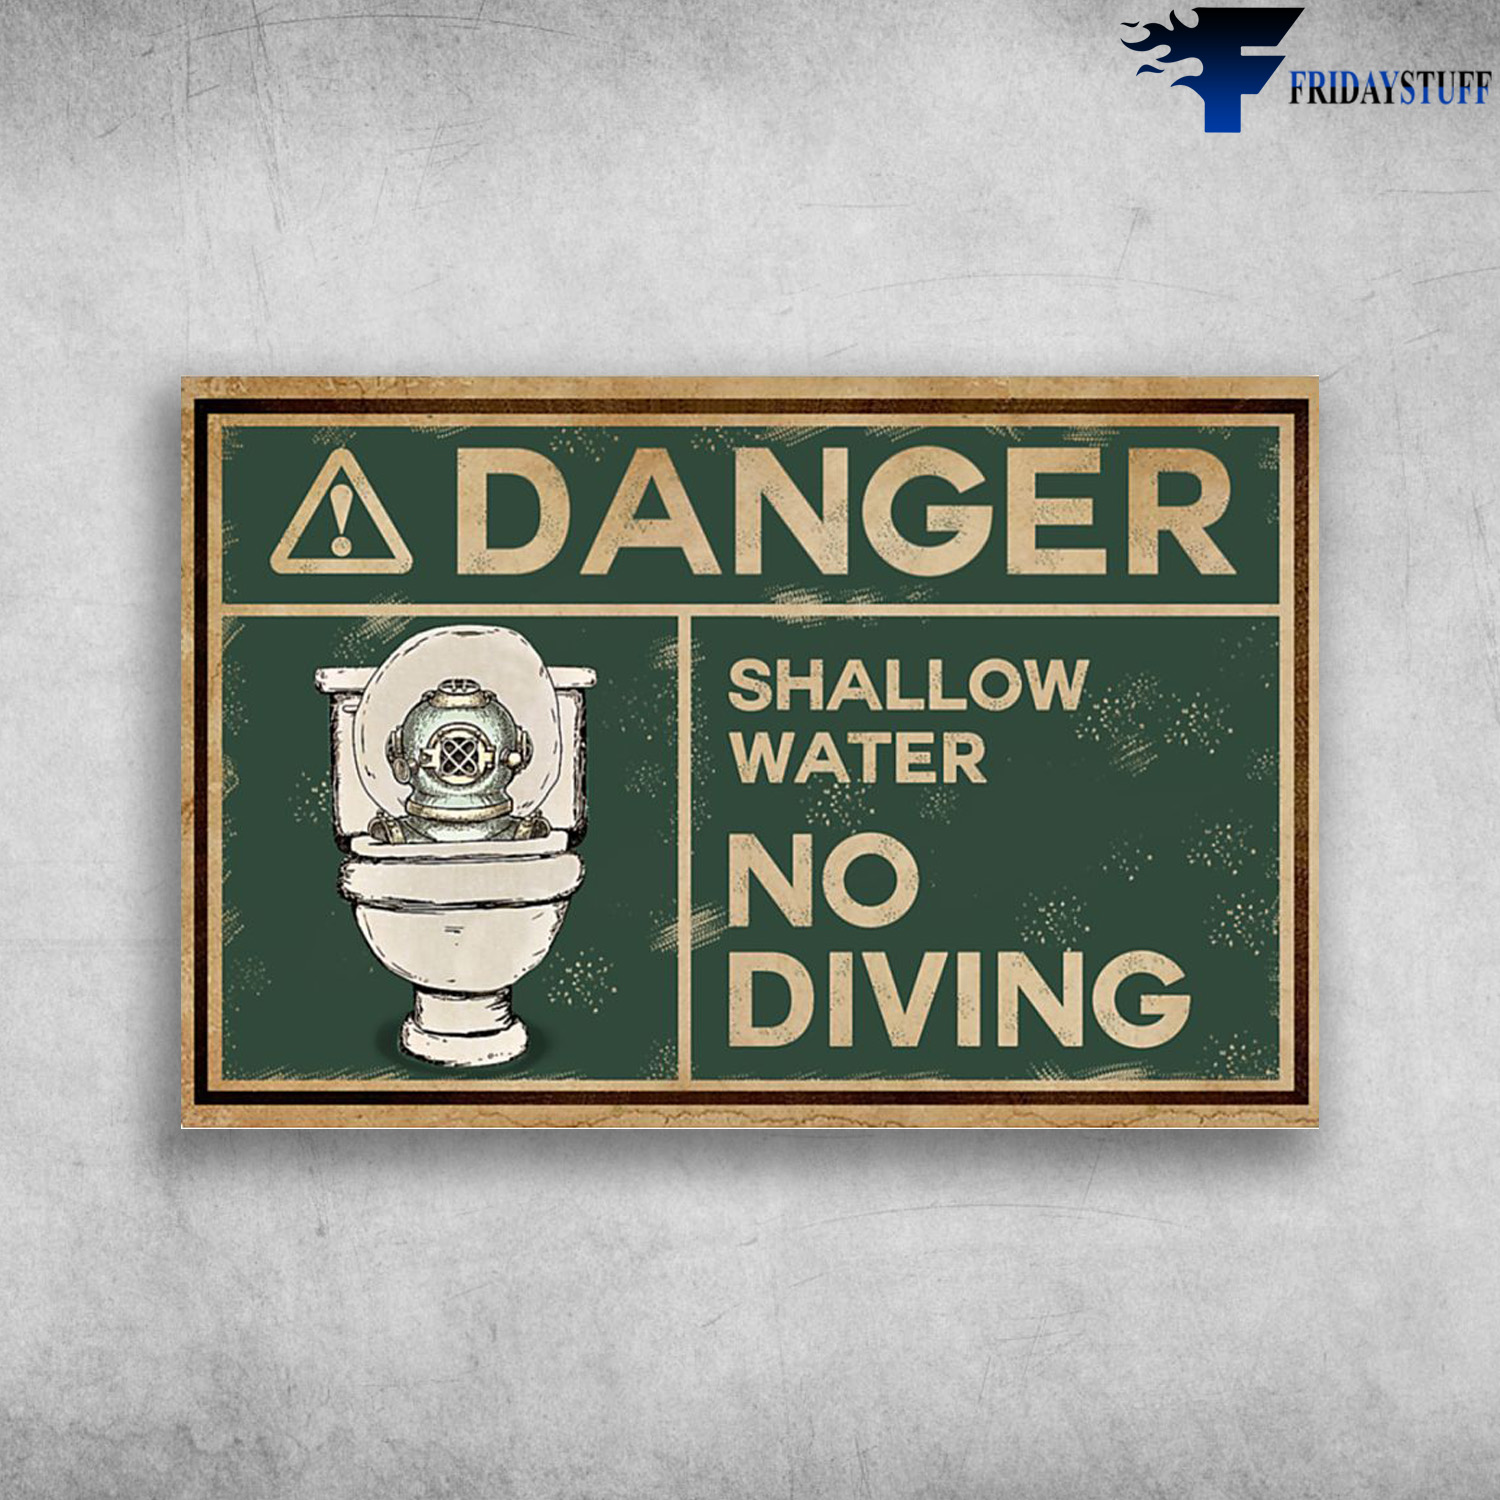 The Toilet Warning - Danger Shallow Water, No Diving